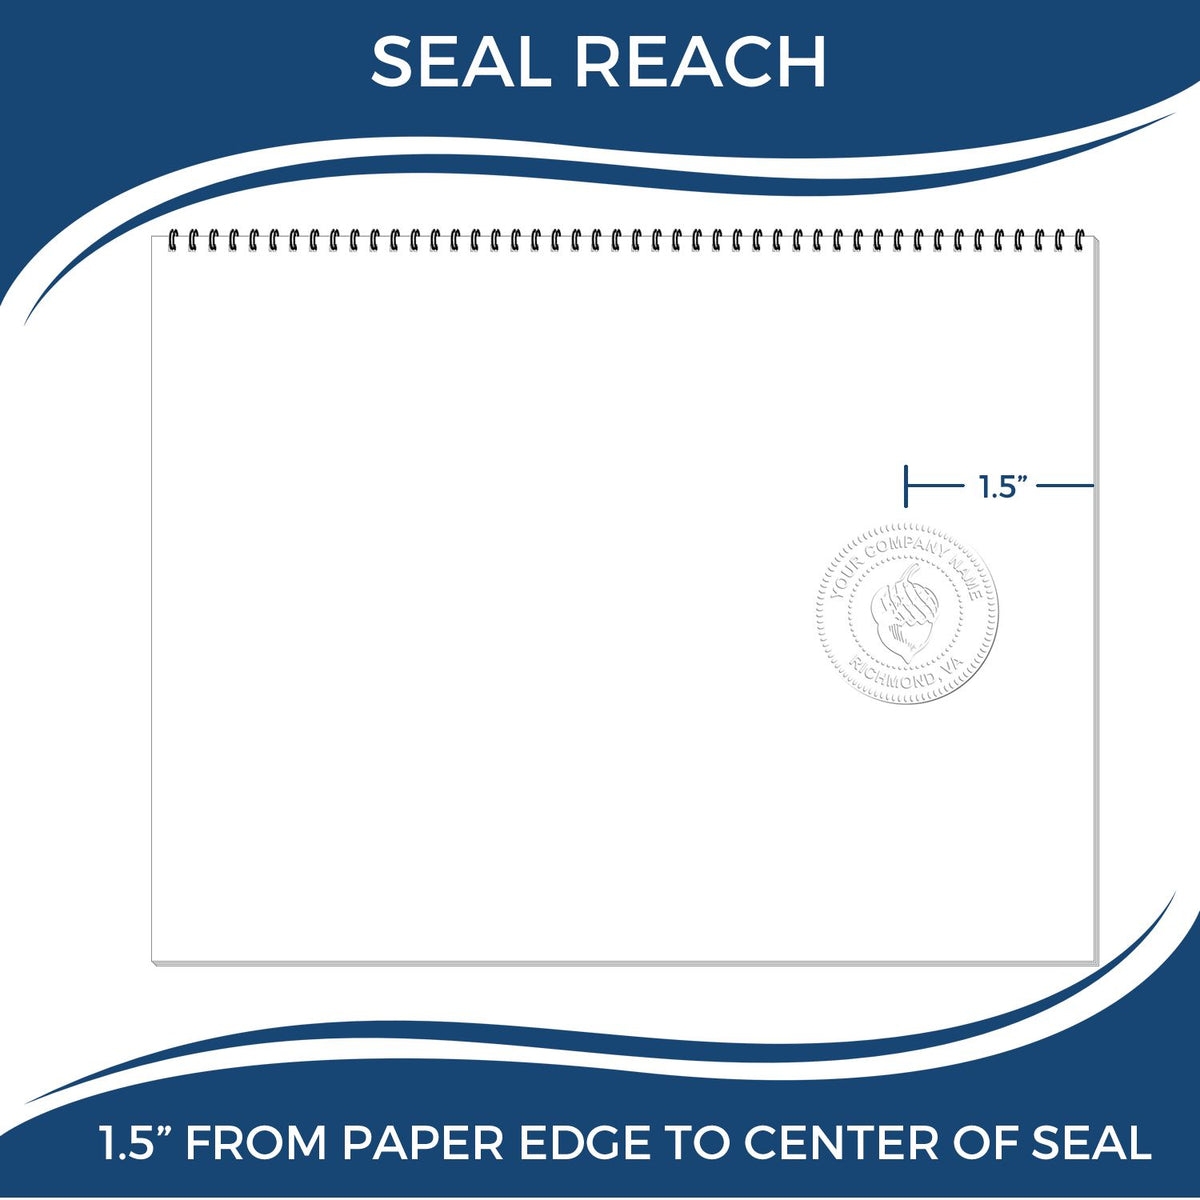 An infographic showing the seal reach which is represented by a ruler and a miniature seal image of the Hybrid Kansas Landscape Architect Seal